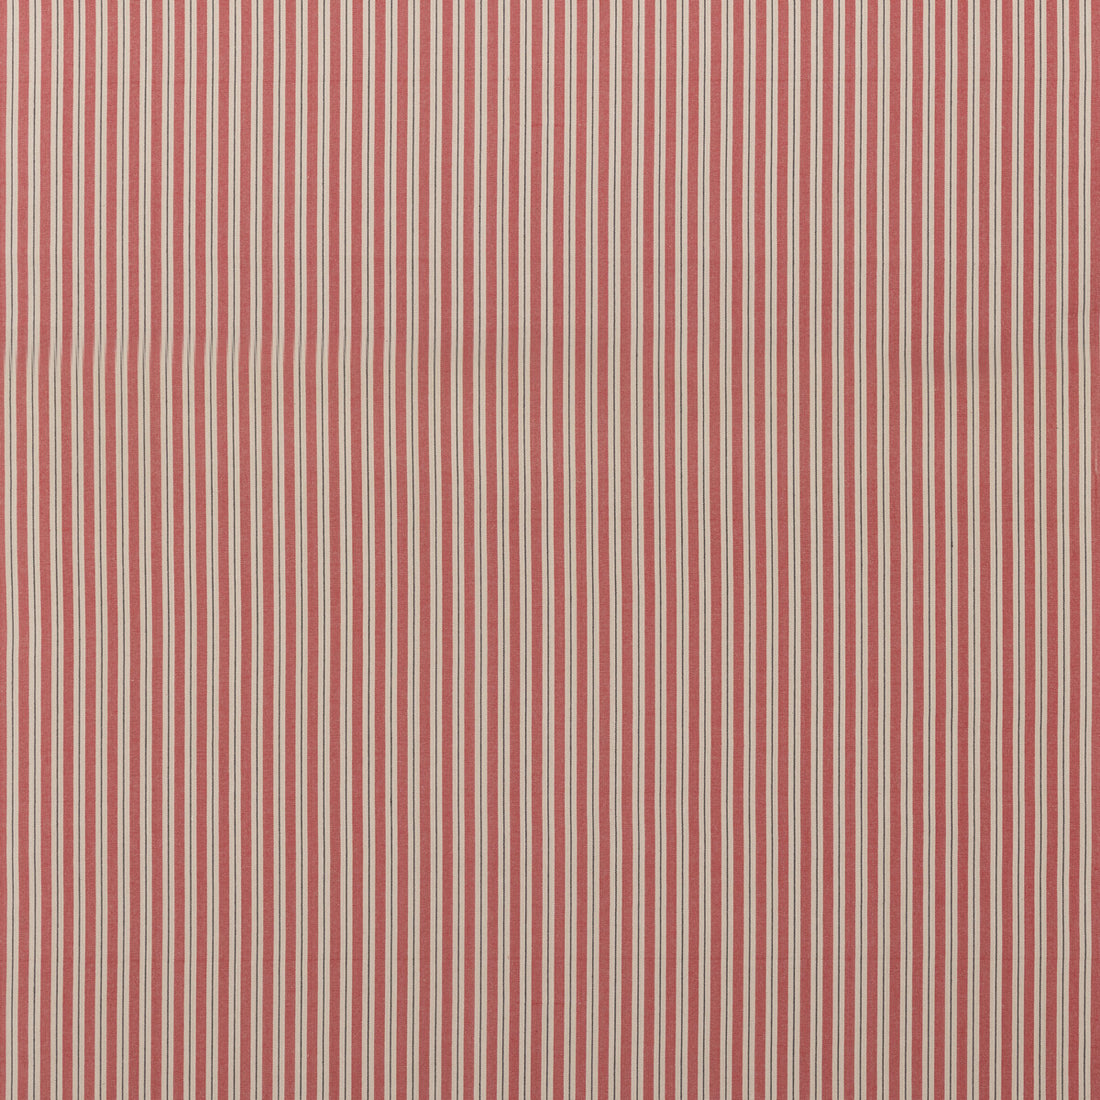 Compass Stripe fabric in red color - pattern FD817.V106.0 - by Mulberry in the Westerly Stripes collection